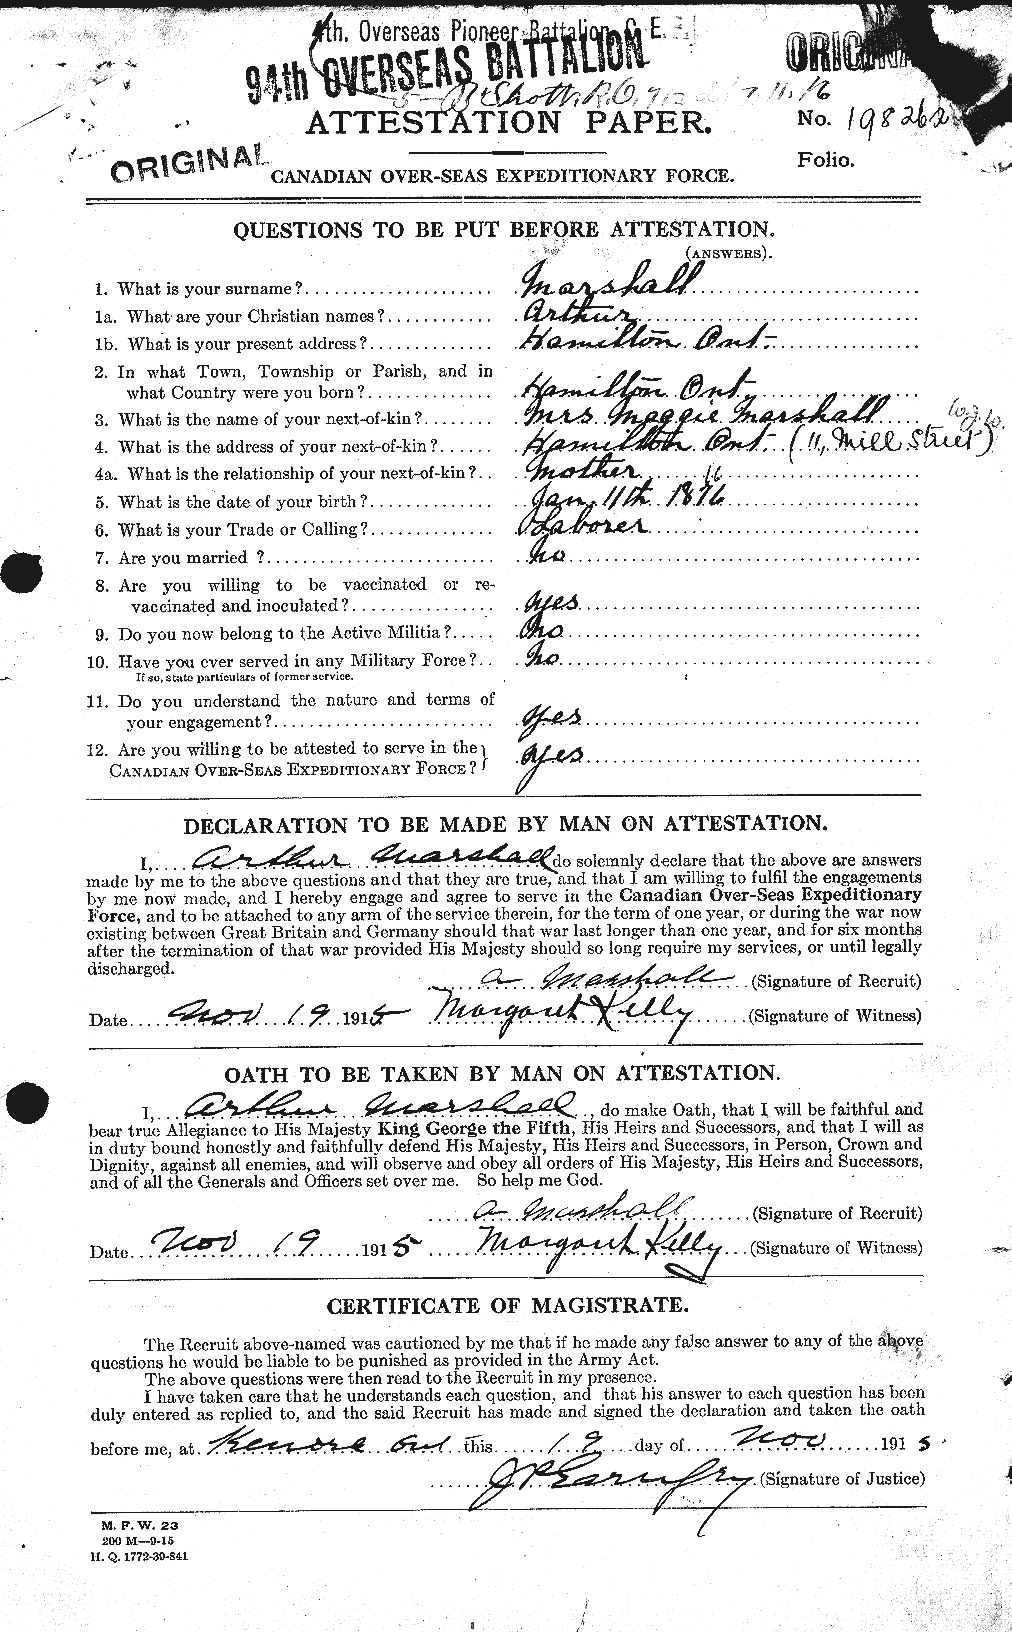 Personnel Records of the First World War - CEF 480426a